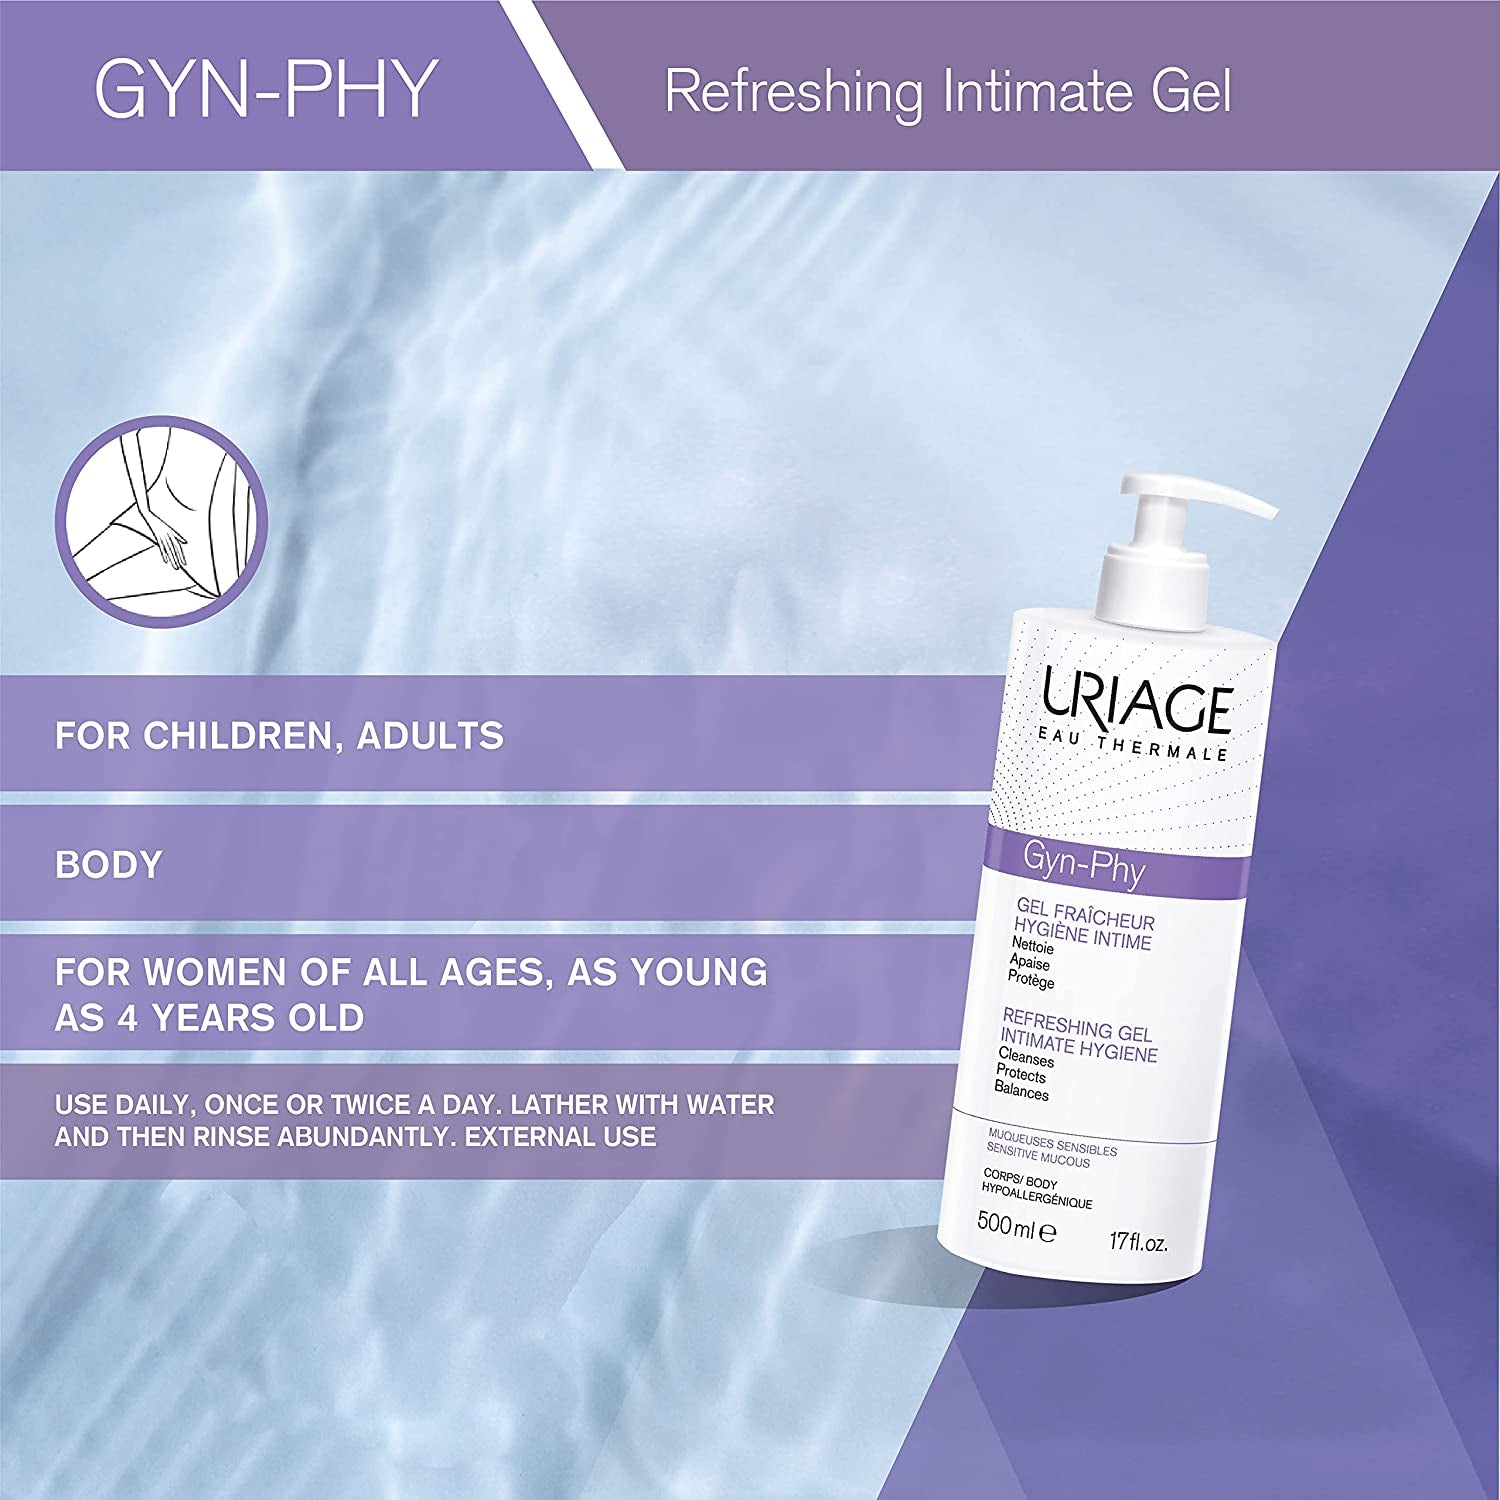 URIAGE Gyn Phy Refreshing Intimate Gel | Soap Free, Paraben-Free & Dermatologist Tested Feminine Wash to Gently Clean, Protect and Balance Even the Most Sensitive Skin - Free & Fast Delivery